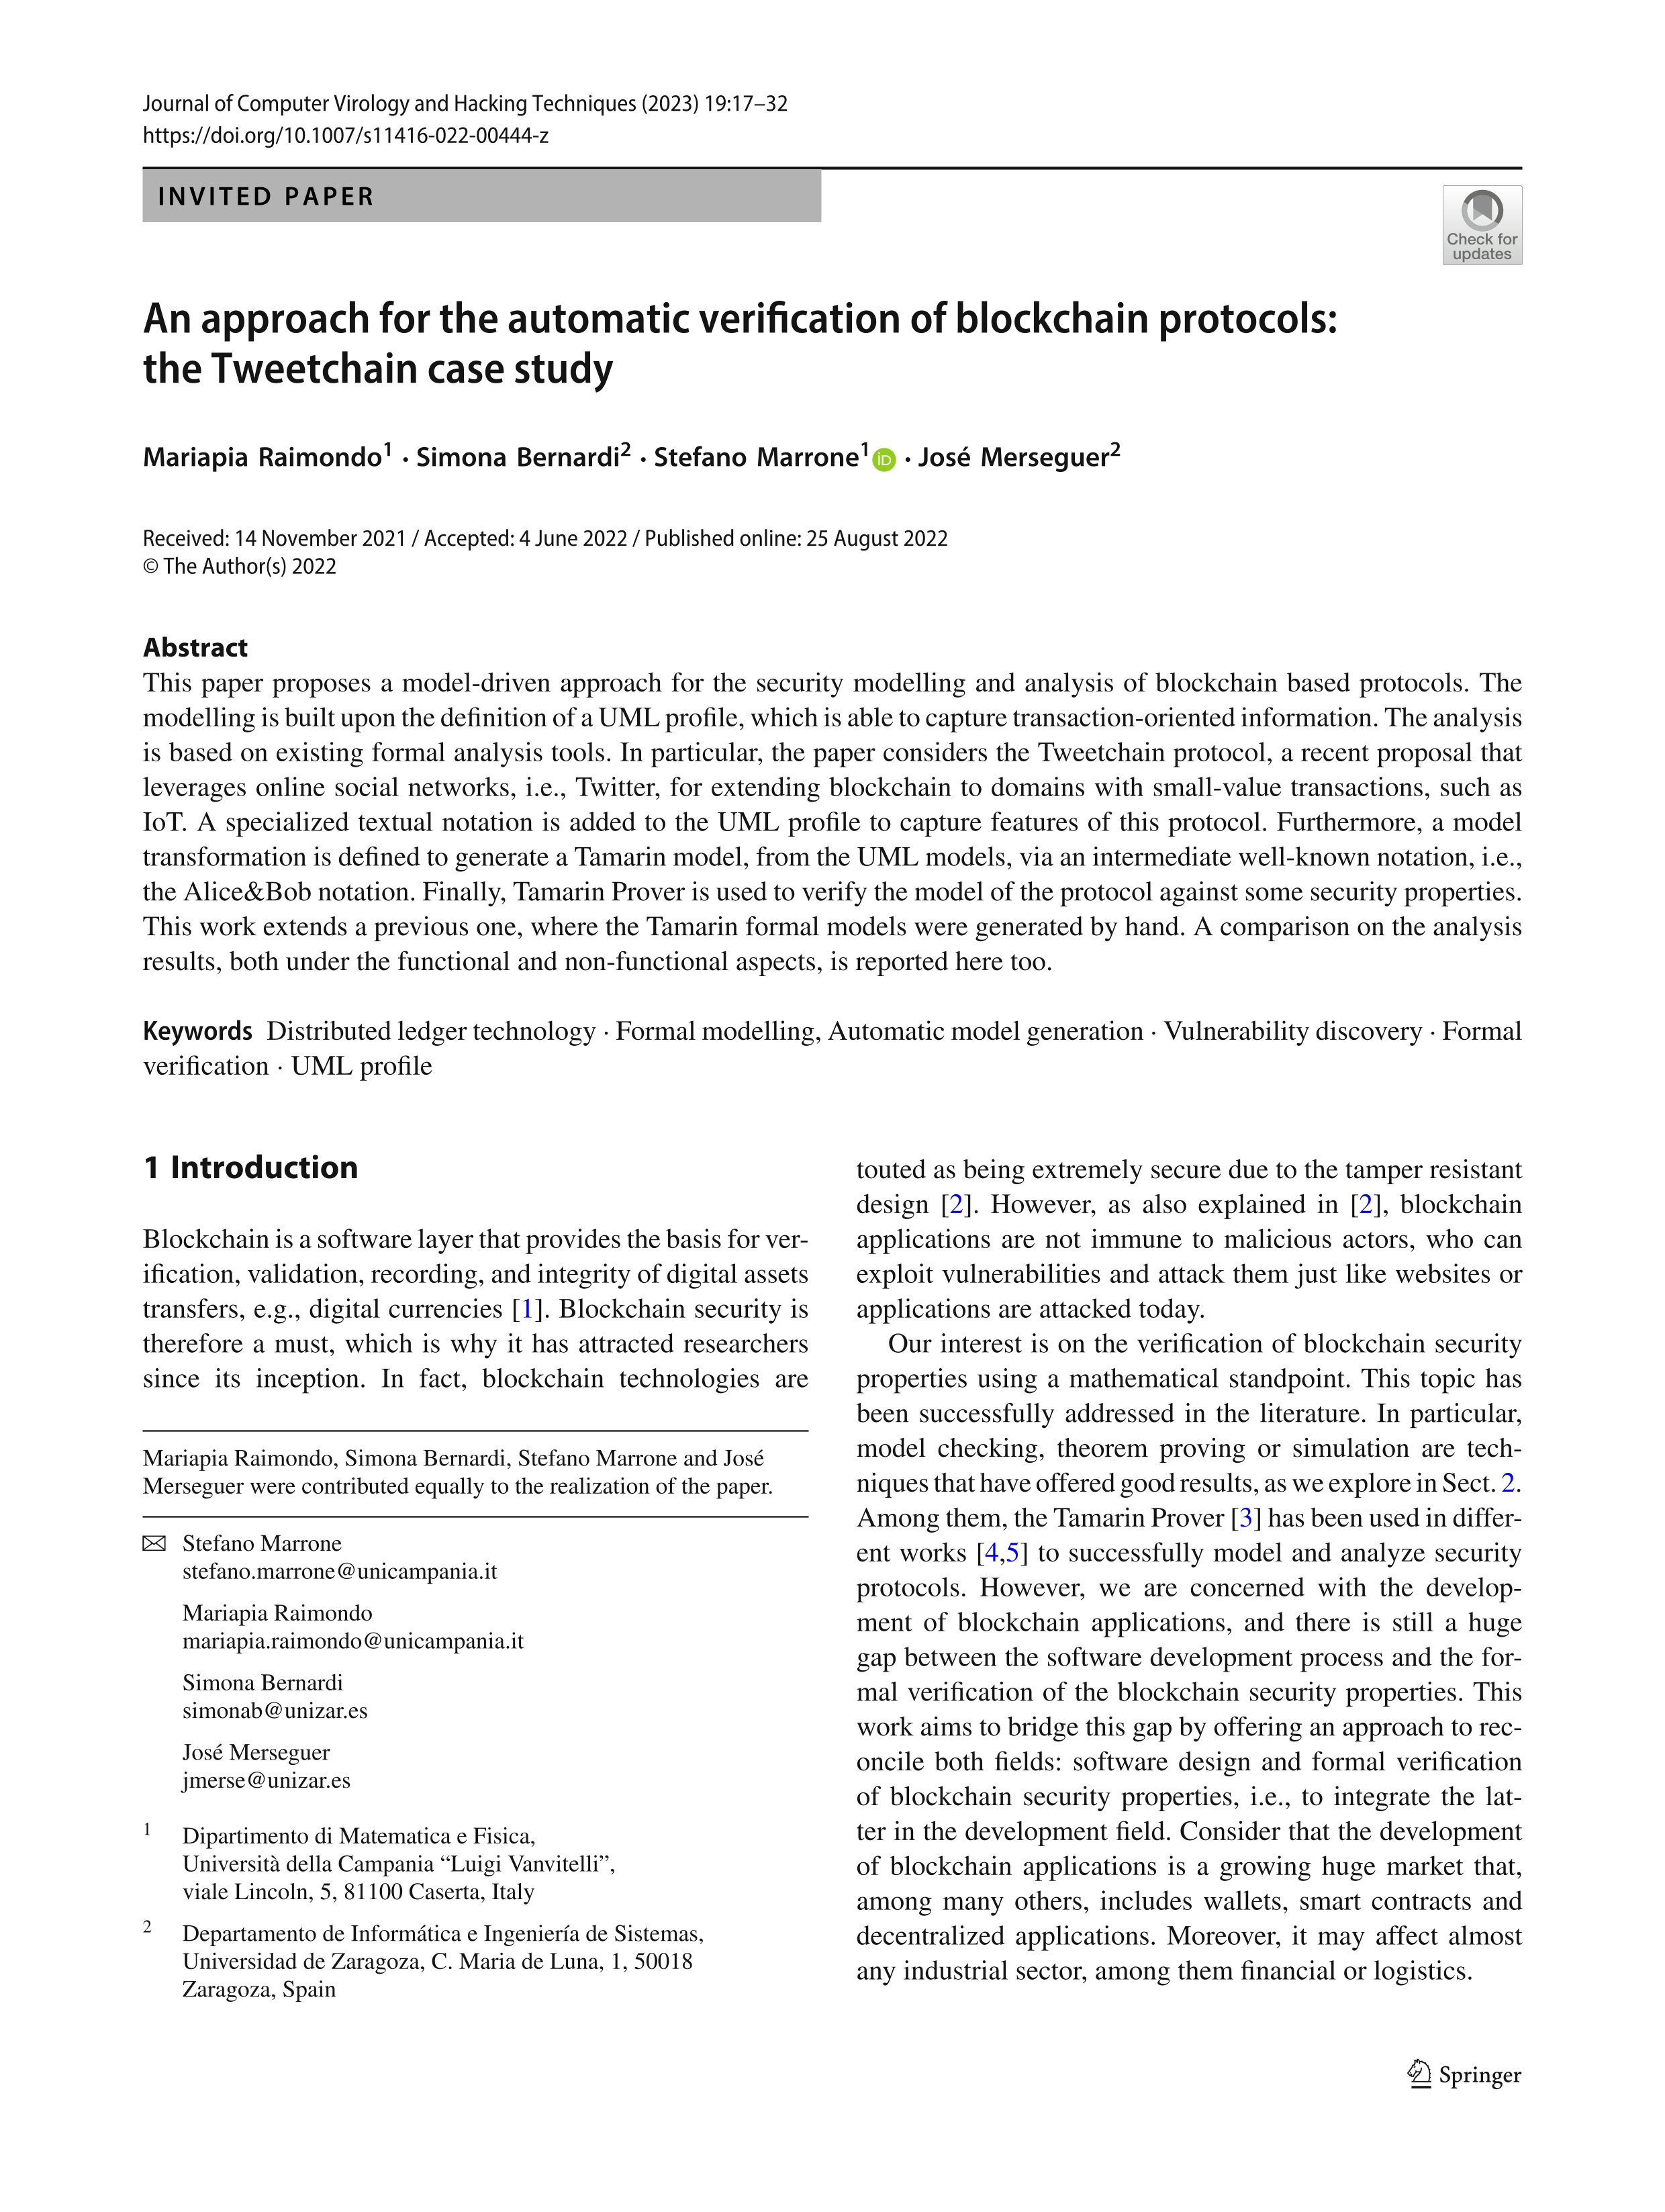 An approach for the automatic verification of blockchain protocols: the Tweetchain case study